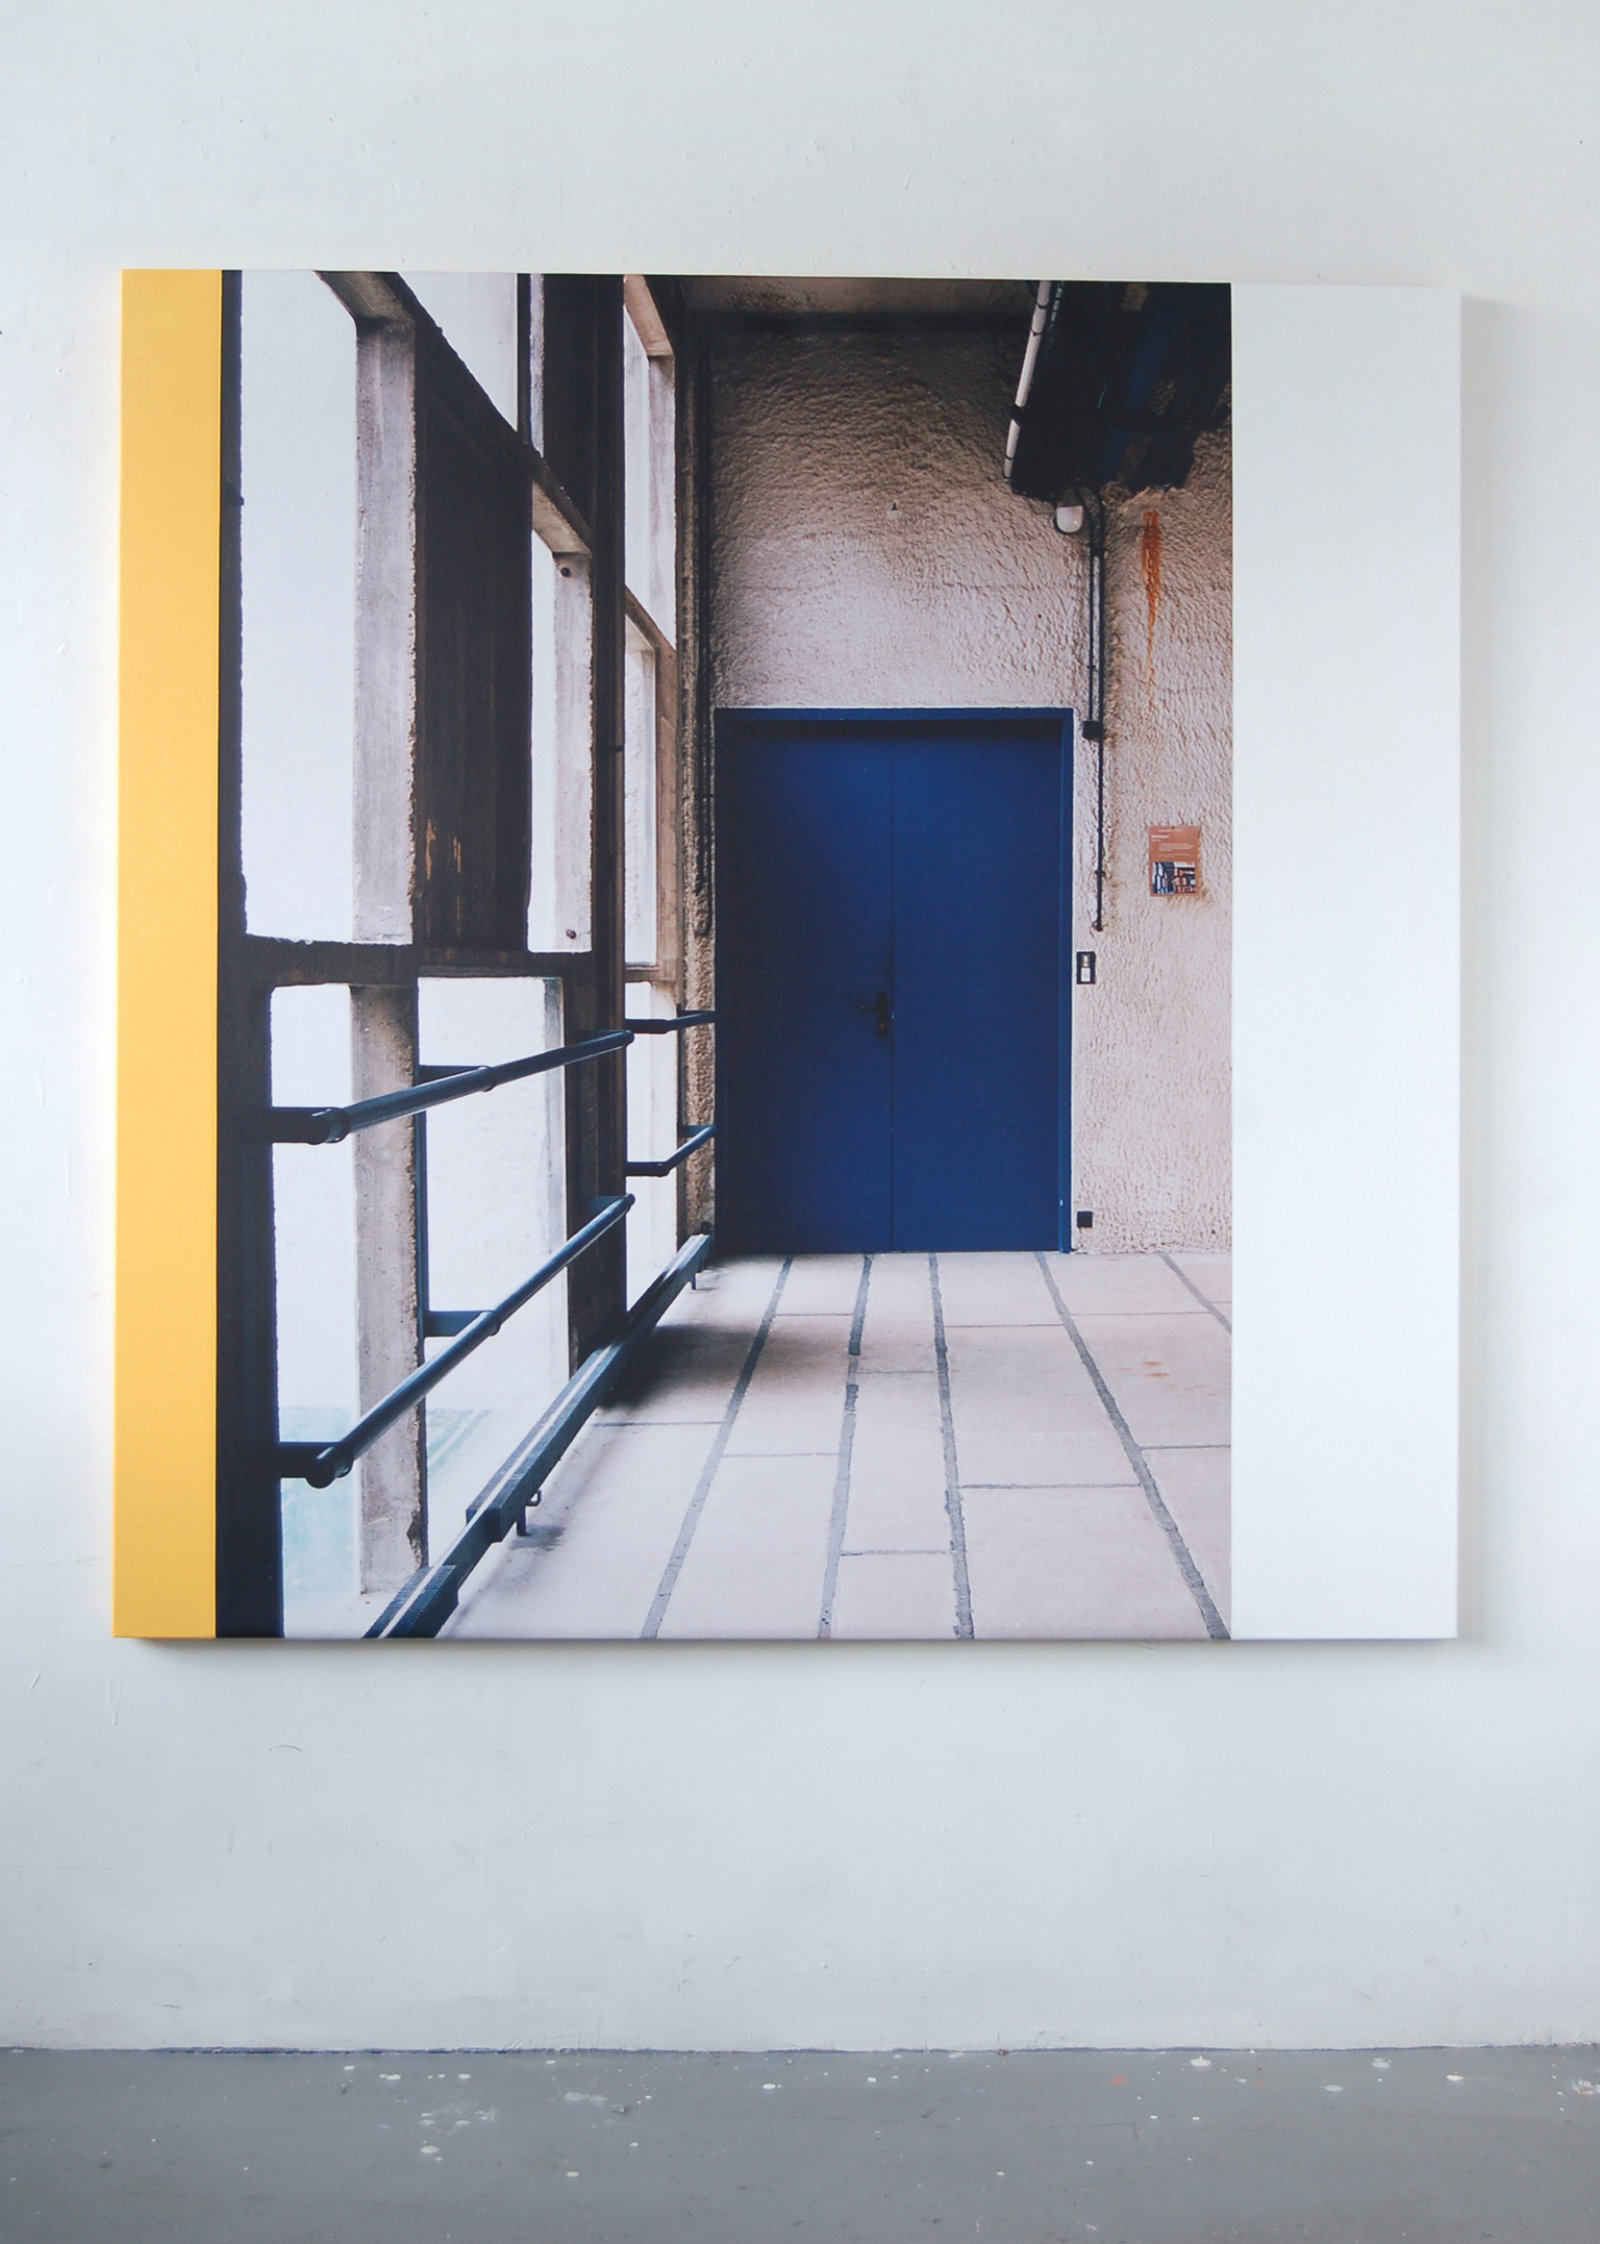 Ian Wallace, La Tourette (The Passage), 2006, photolaminate and acrylic on canvas, 60 x 60 in. (152 x 152 cm)